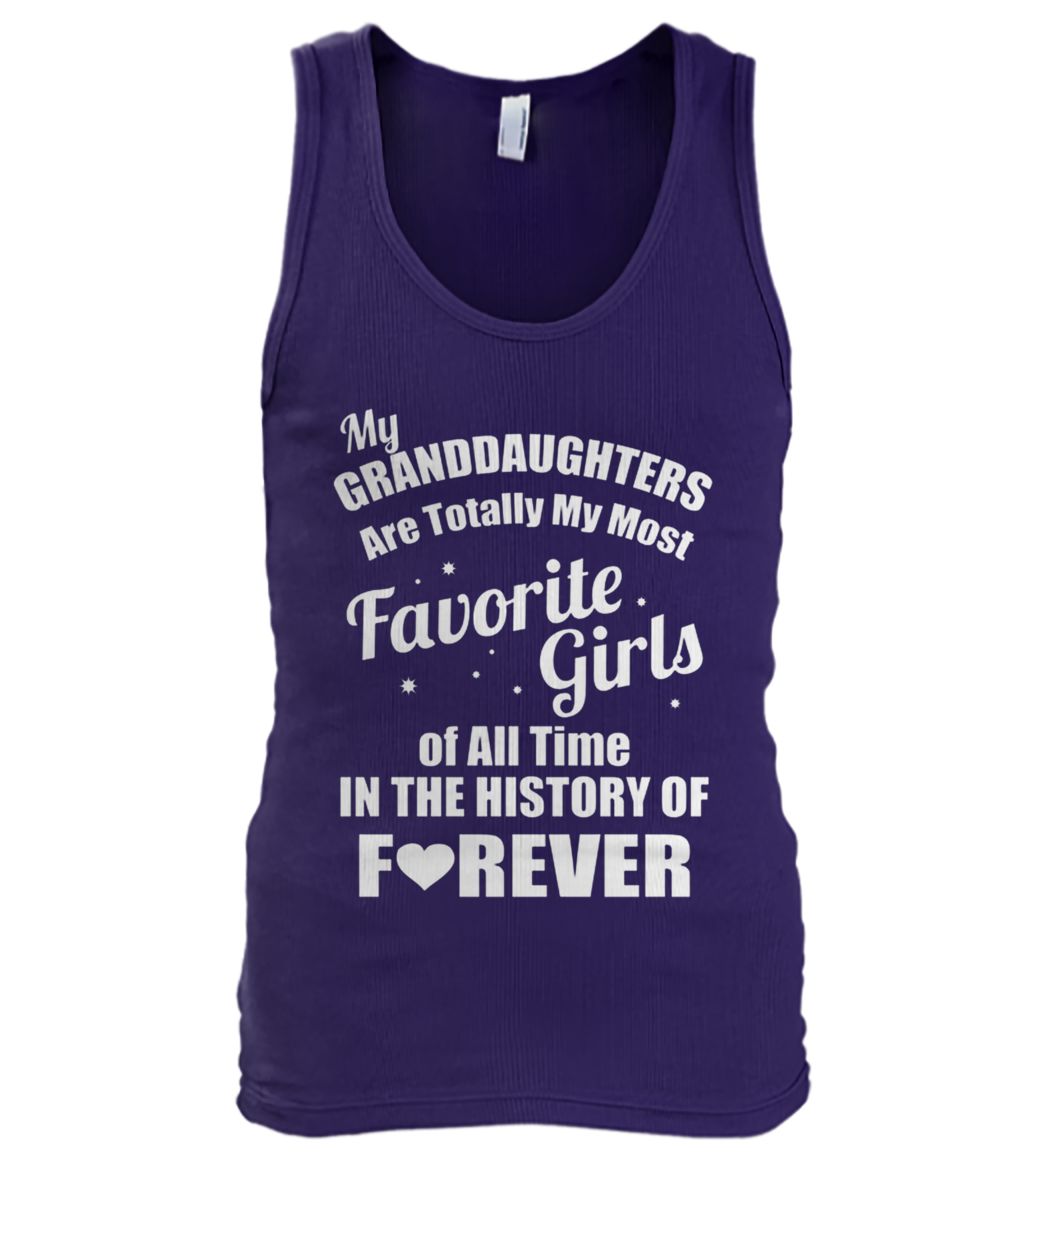 My granddaughter is totally my most favorite girl of all time in the history of forever tank top